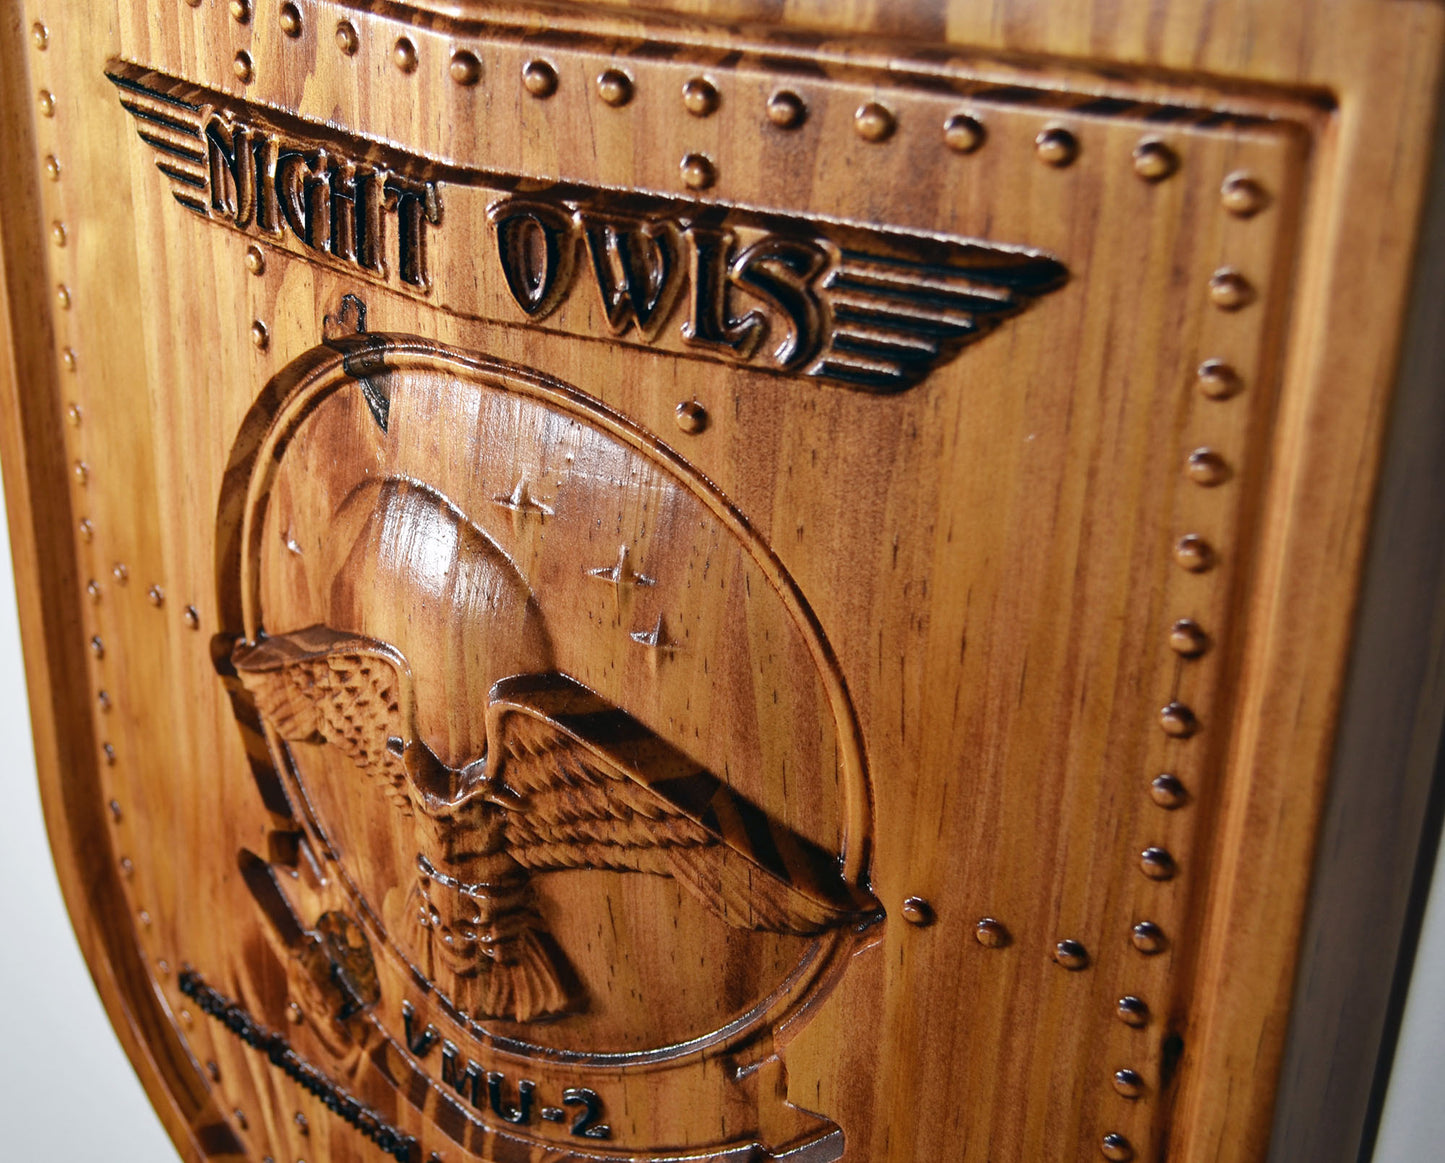 USMC Unmanned Aerial Vehicle Squadron 2, VMU-2, Night Owls, Marine Corps Air Wing, 3d wood carving, military plaque